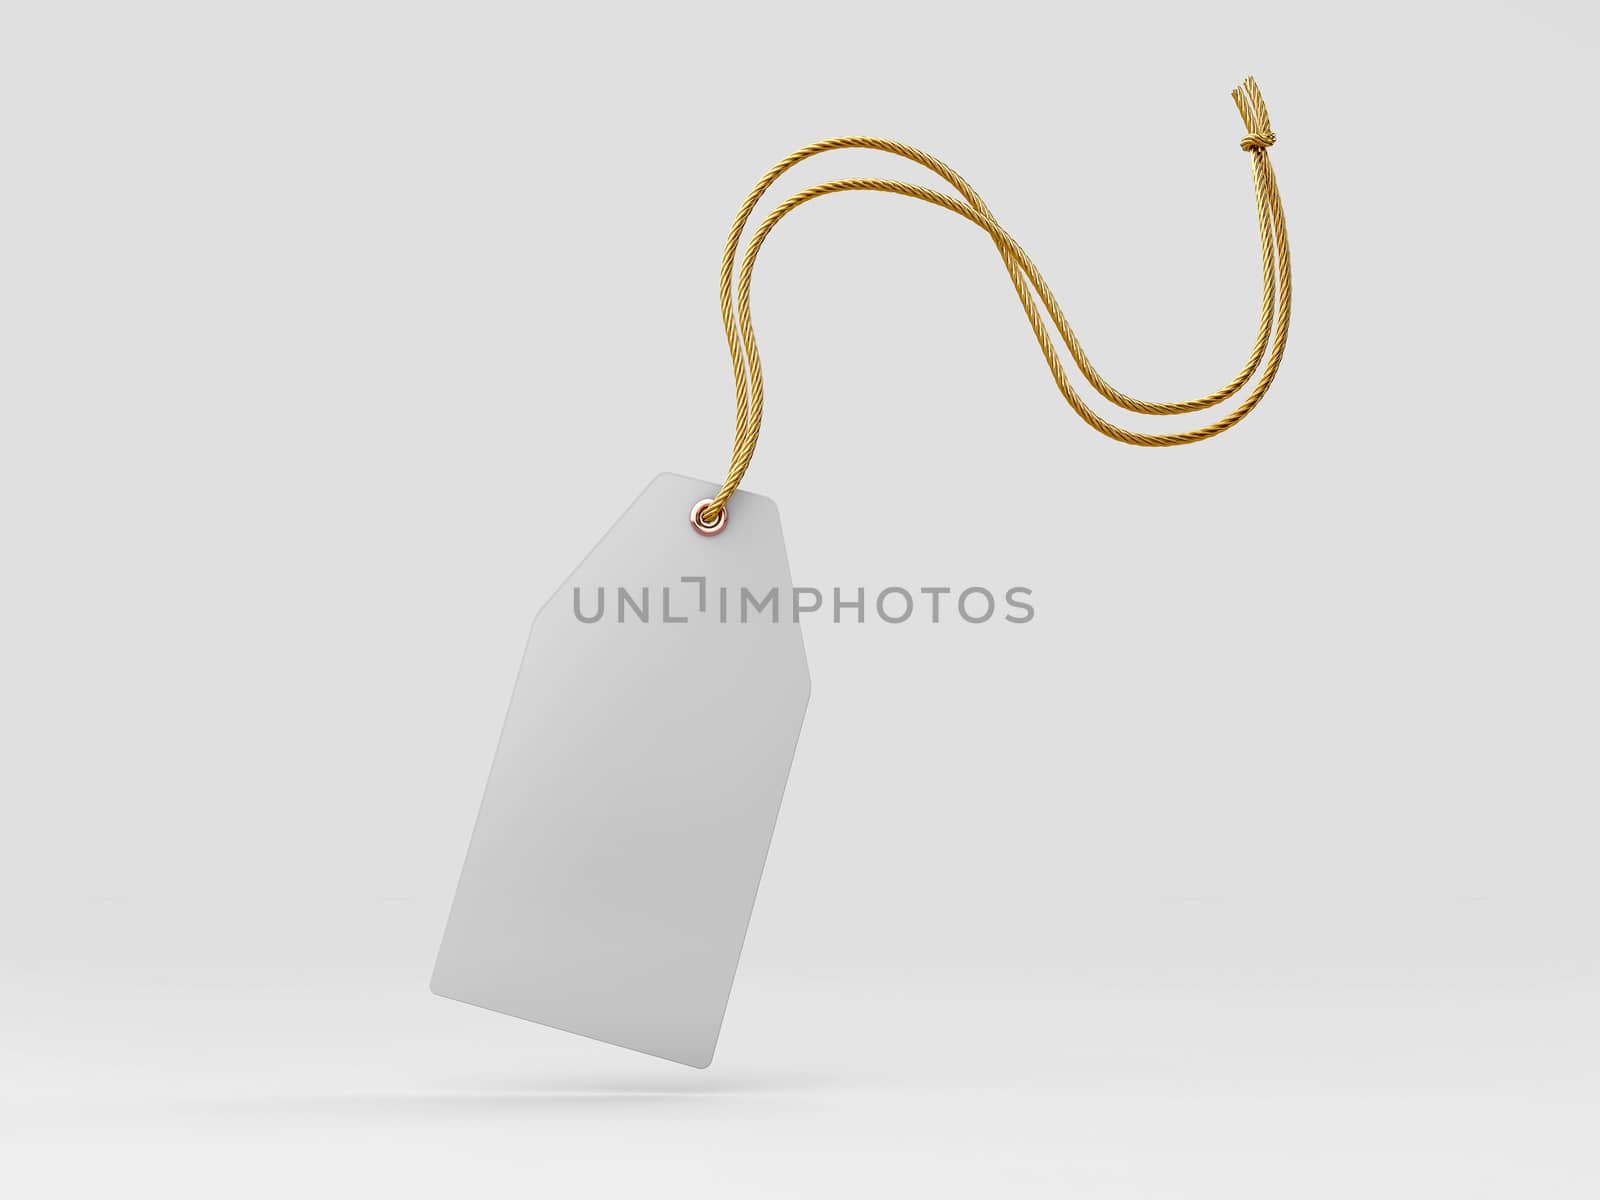 3drendering of Blank tag tied with brown string. Price tag, gift tag, clipping path included by tussik